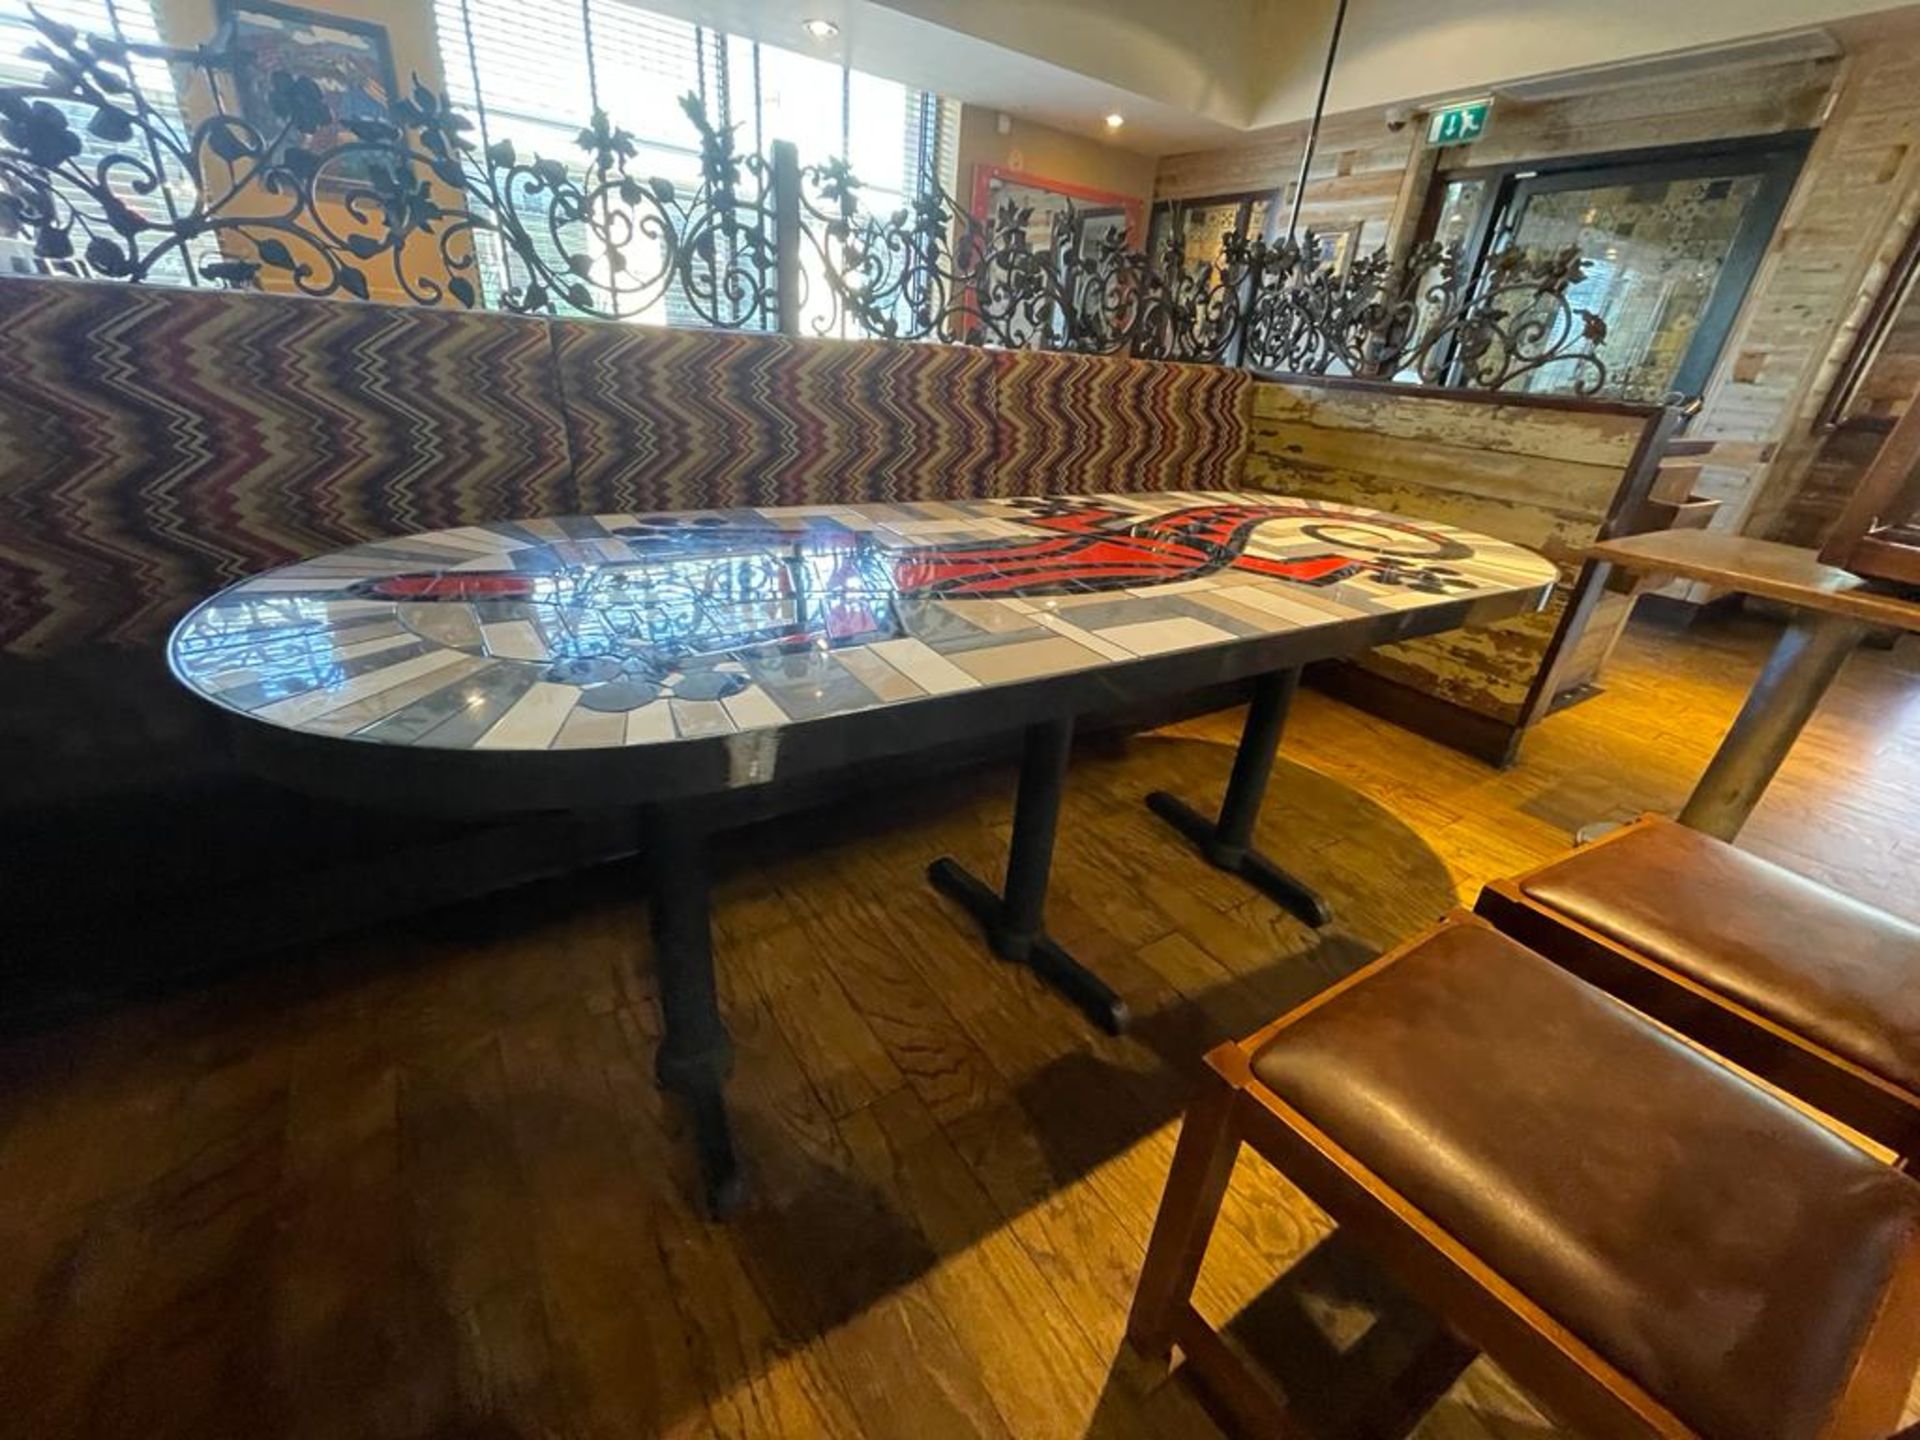 1 x Bespoke Gecko Lizard Mosaic Dining Table With Cast Iron Bases - Ref: PAV113 - Height H74 x - Image 3 of 5